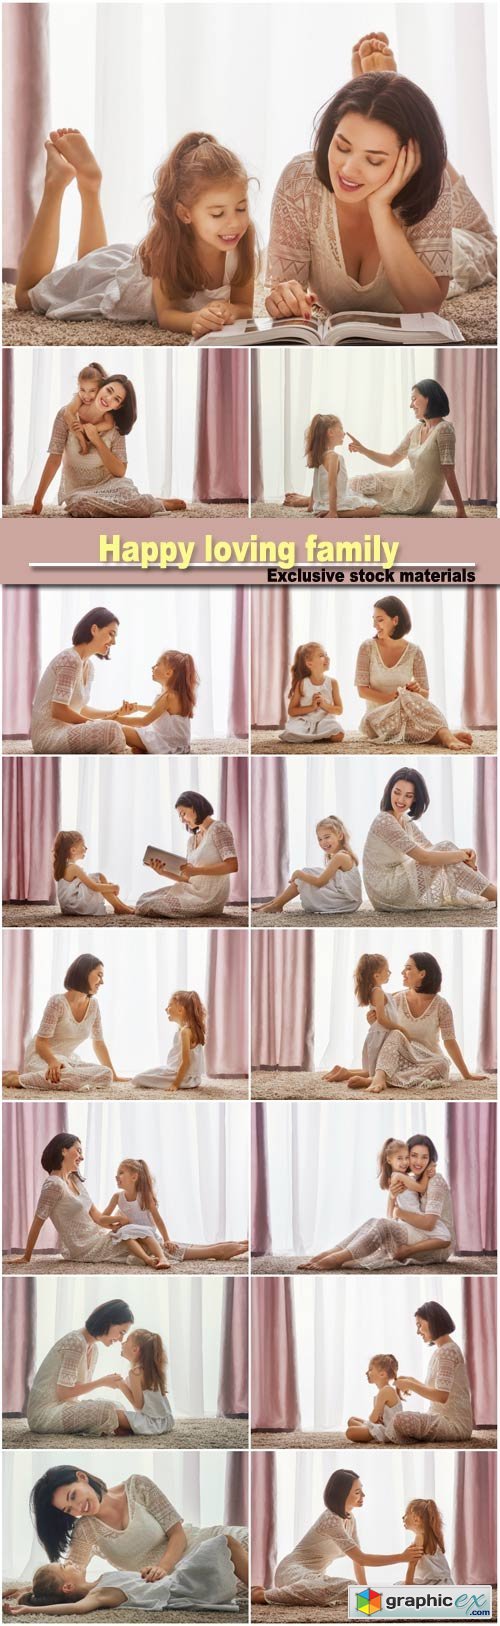 Happy loving family, mother and her daughter child girl playing and hugging